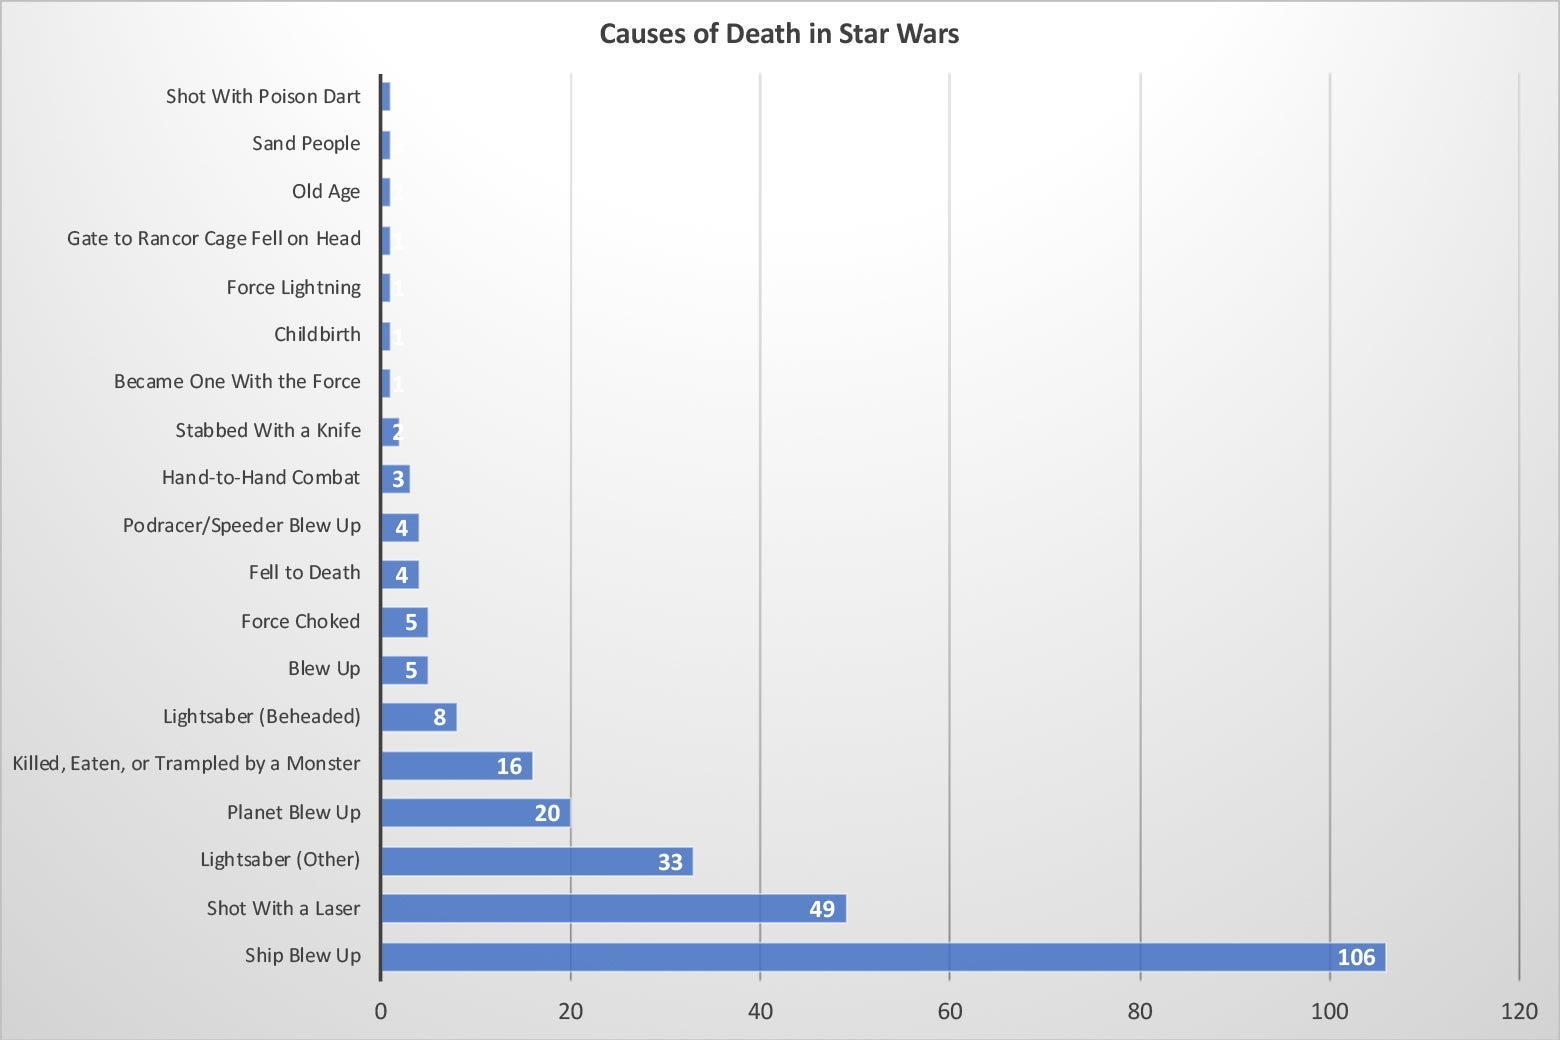 A chart showing the causes of death in Star Wars. The highest number of deaths by far is from ships blowing up.